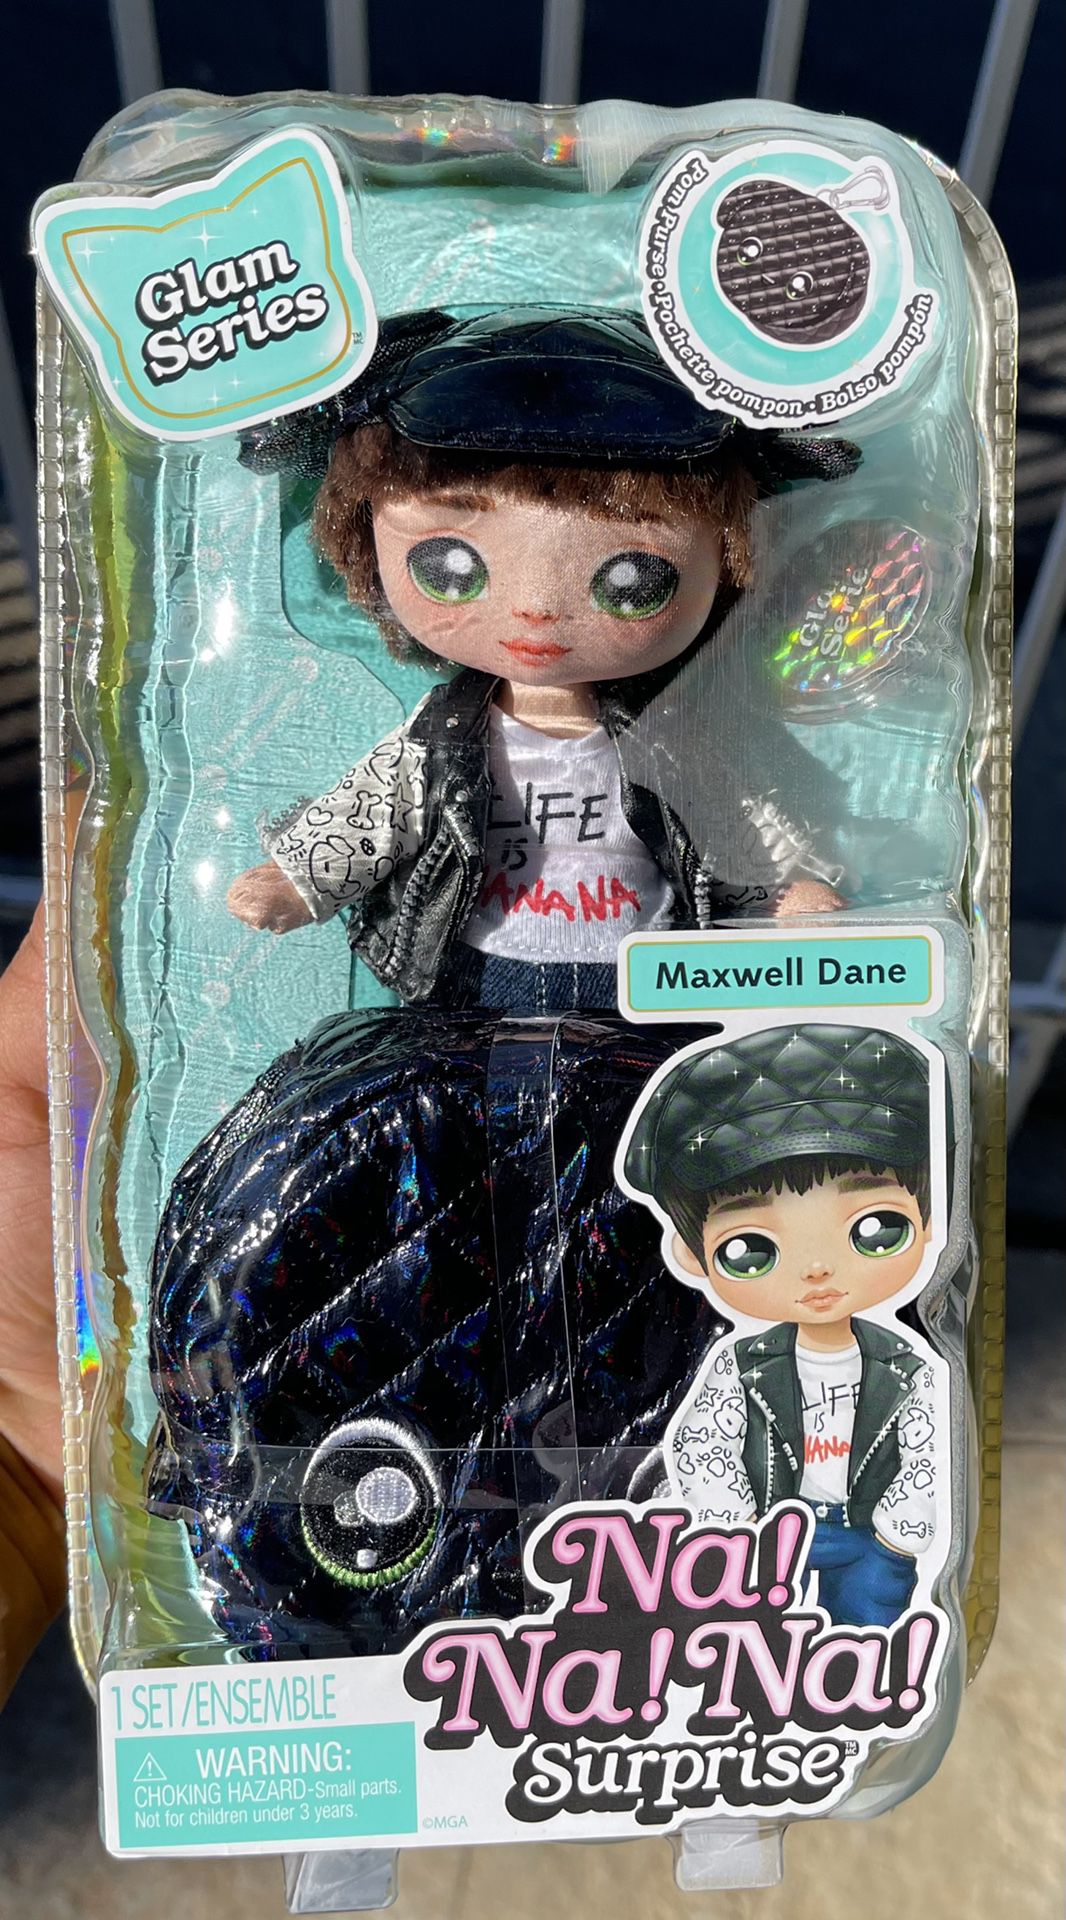 NEW Na! Na! Na! Surprise Maxwell Dane Doll Glam Series Puppy Dog Pom Purse         categories: dolls, lol, rainbow high, collectibles, girls, Christma